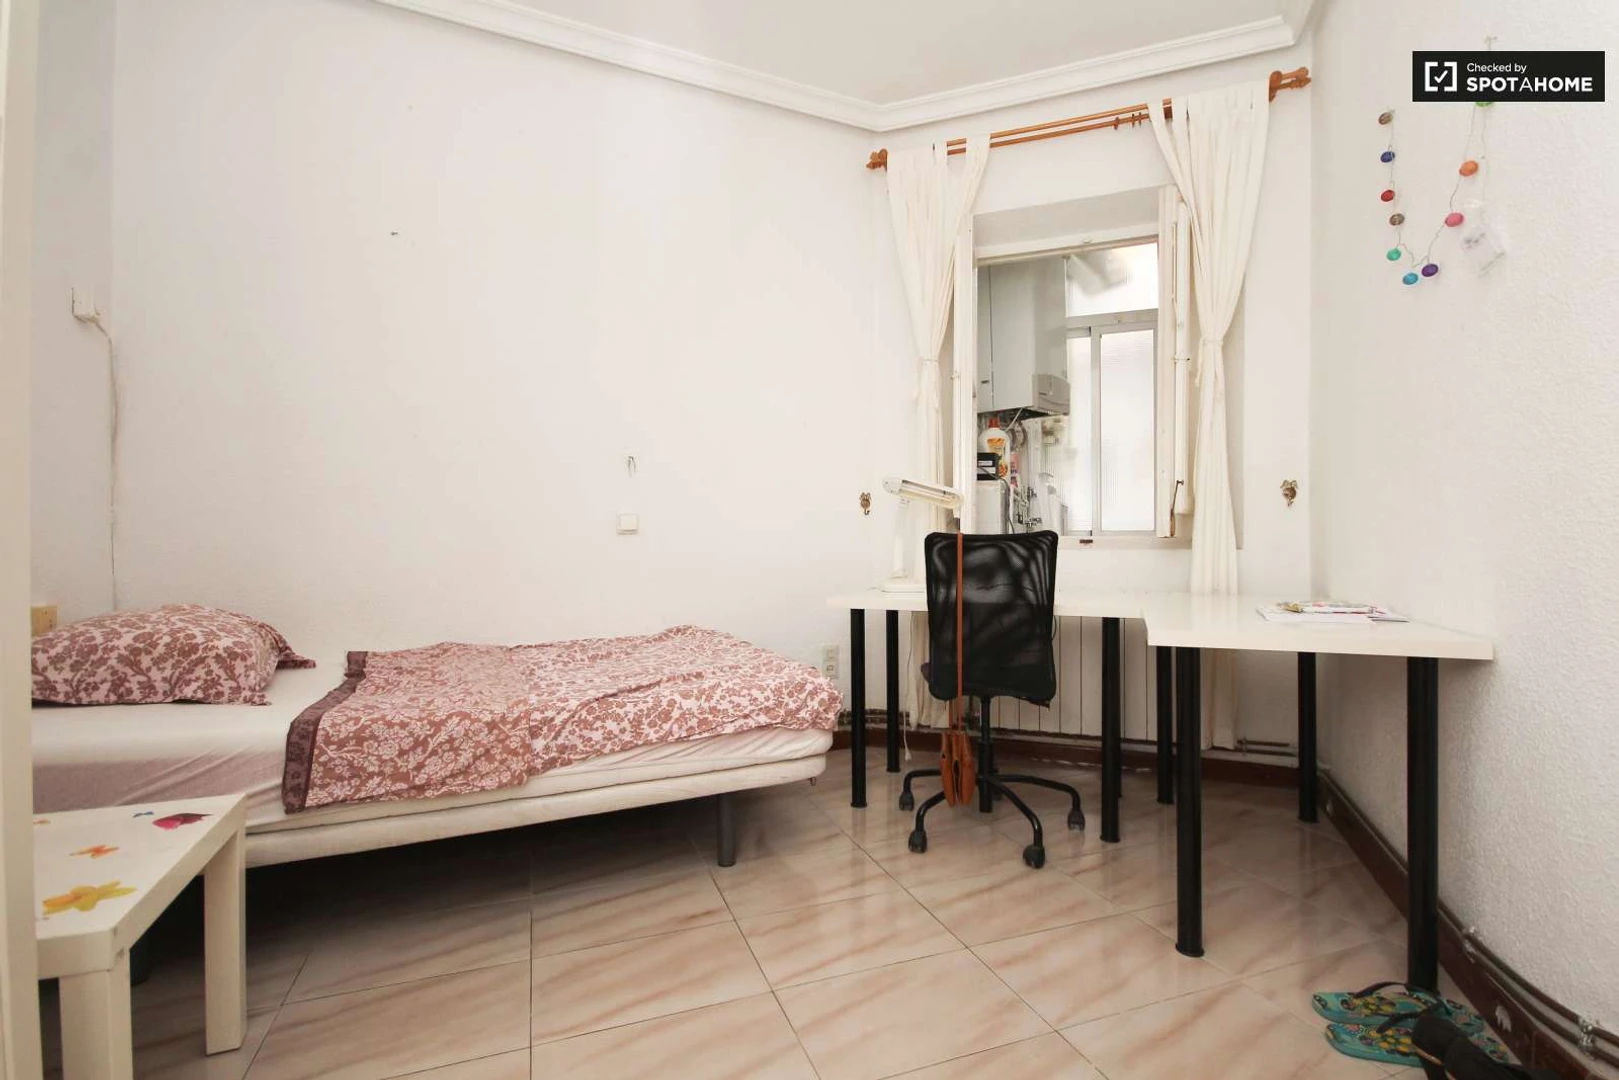 Room for rent with double bed Granada